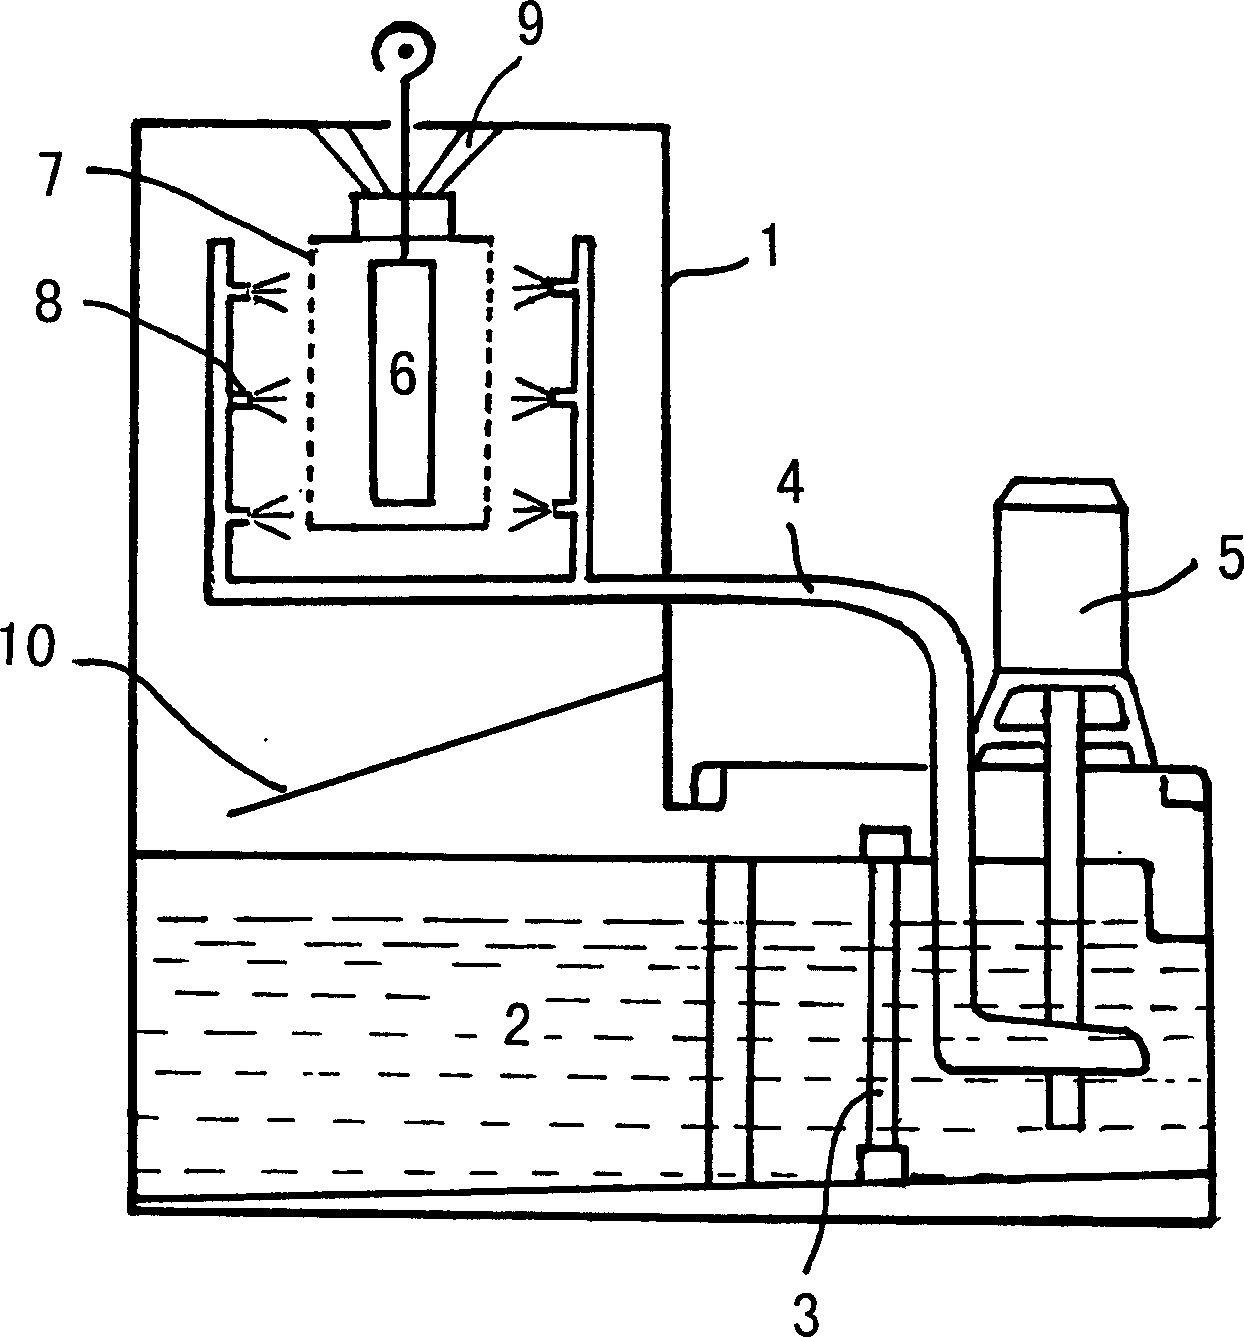 Method and apparatus for rapid preparation of anodic oxidation film on aluminium alloy products